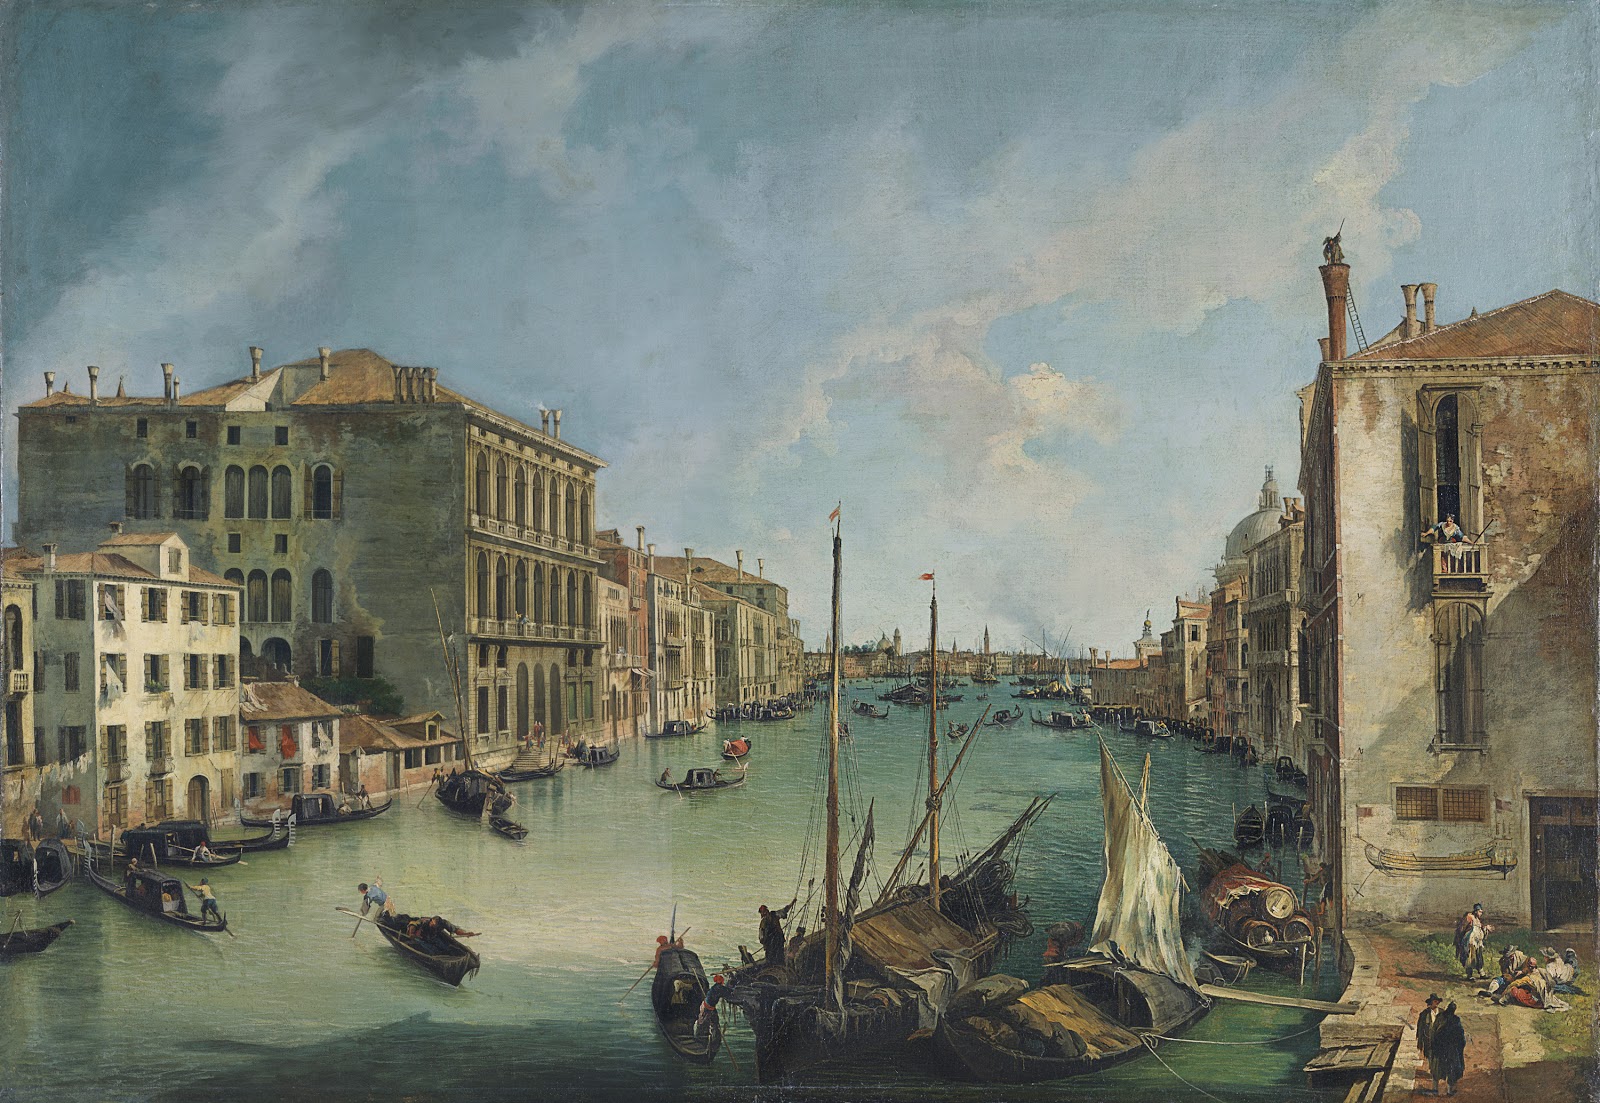 Canaletto-1697-1768 (38).jpg